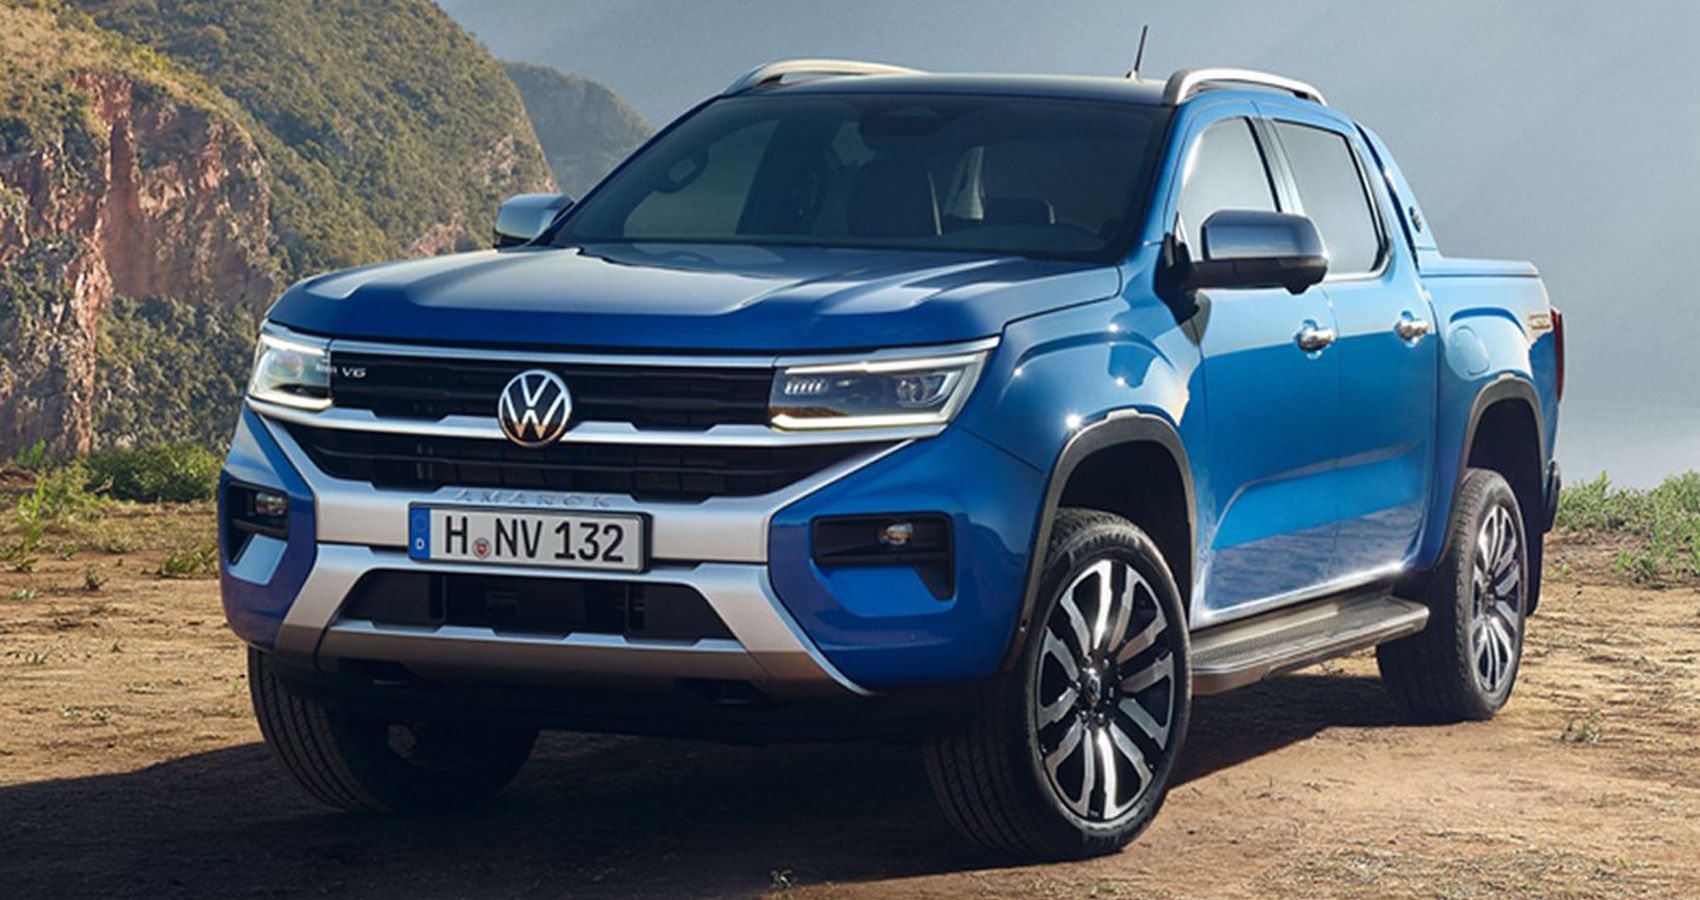 All-New Volkswagen Amarok Share DNA With The Ford Ranger